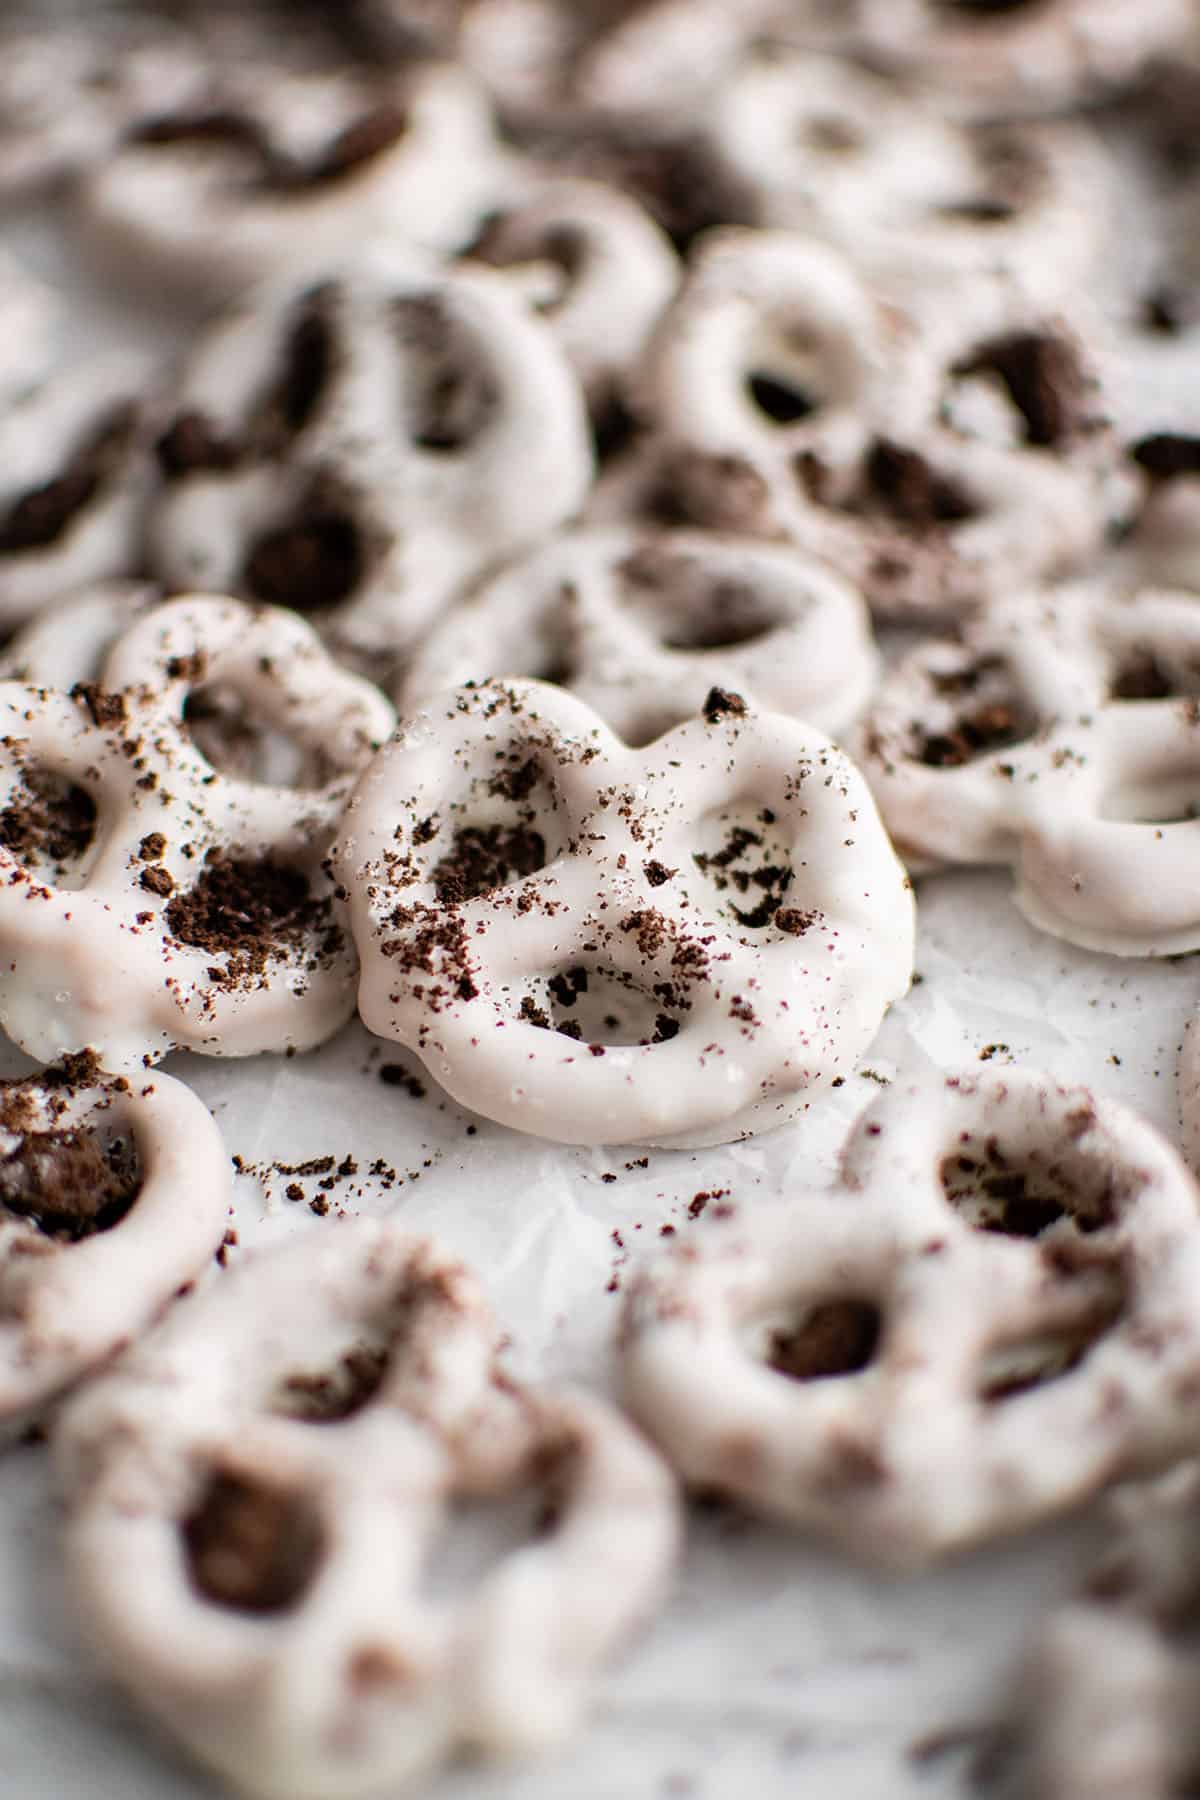 pretzels with white chocolate coating and oreo crumbs